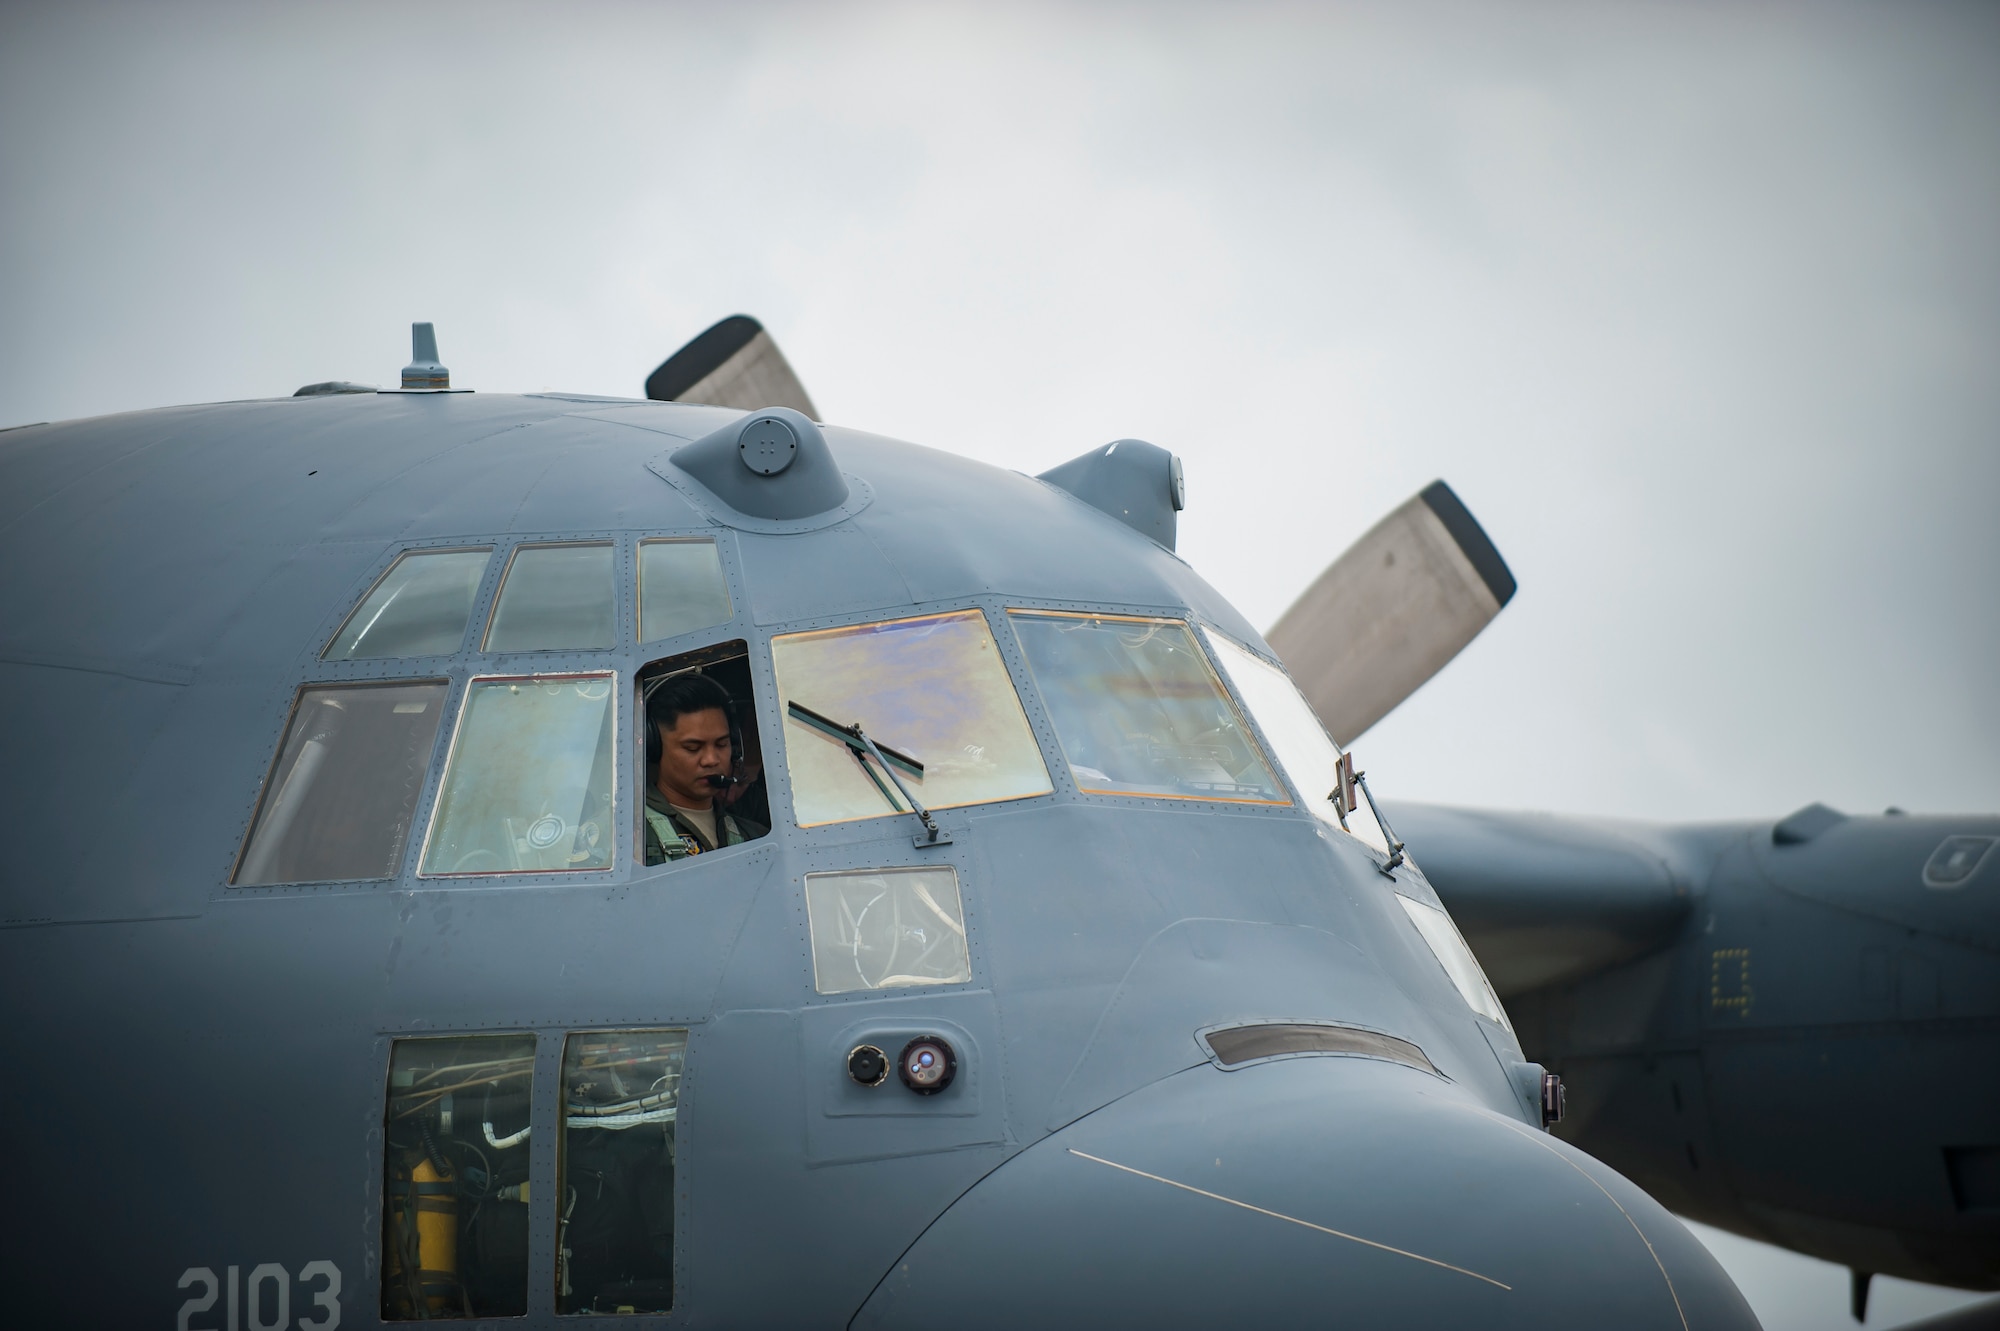 Air Force Reserve  Maj. Chris Ferrara, 39th Rescue Squadron pilot from Patrick Air Force Base in Cocoa Beach, Florida, performs a preflight inspection of an HC-130- P/N “King” on May 25th, 2018, at Miami, before a practice run for the 2nd annual Salute to American Heroes Air and Sea Show. This two-day event showcases military fighter jets and other aircraft and equipment from all branches of the United States military in observance of Memorial Day, honoring servicemembers who have made the ultimate sacrifice. (U.S. Air Force photo/Staff Sgt. Jared Trimarchi)